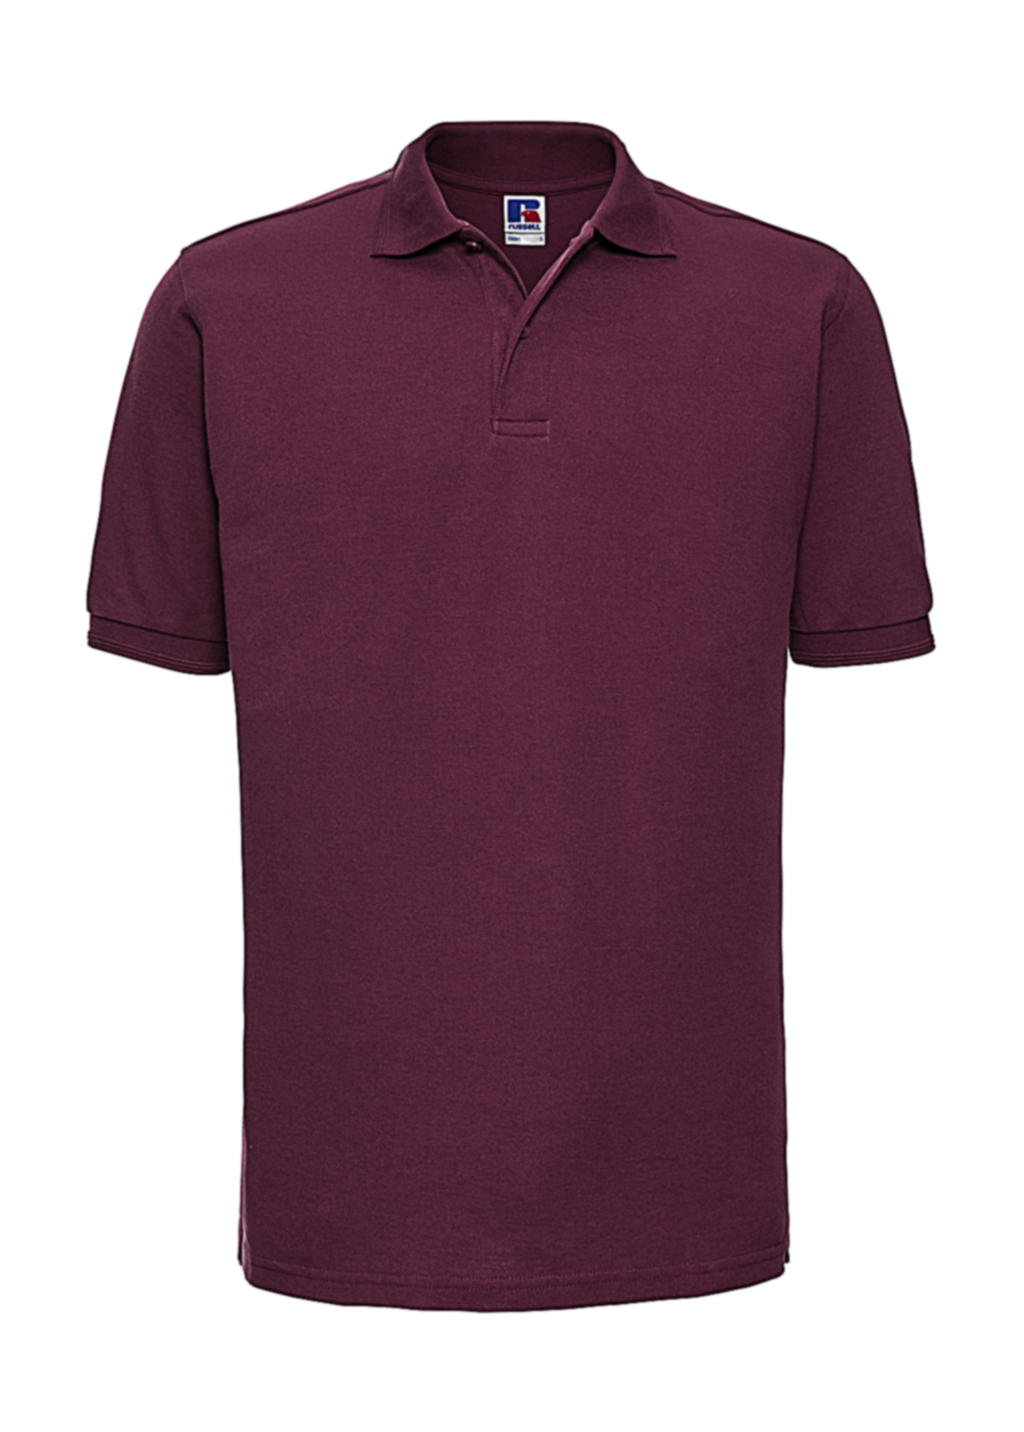  Hardwearing Polo - up to 4XL in Farbe Burgundy